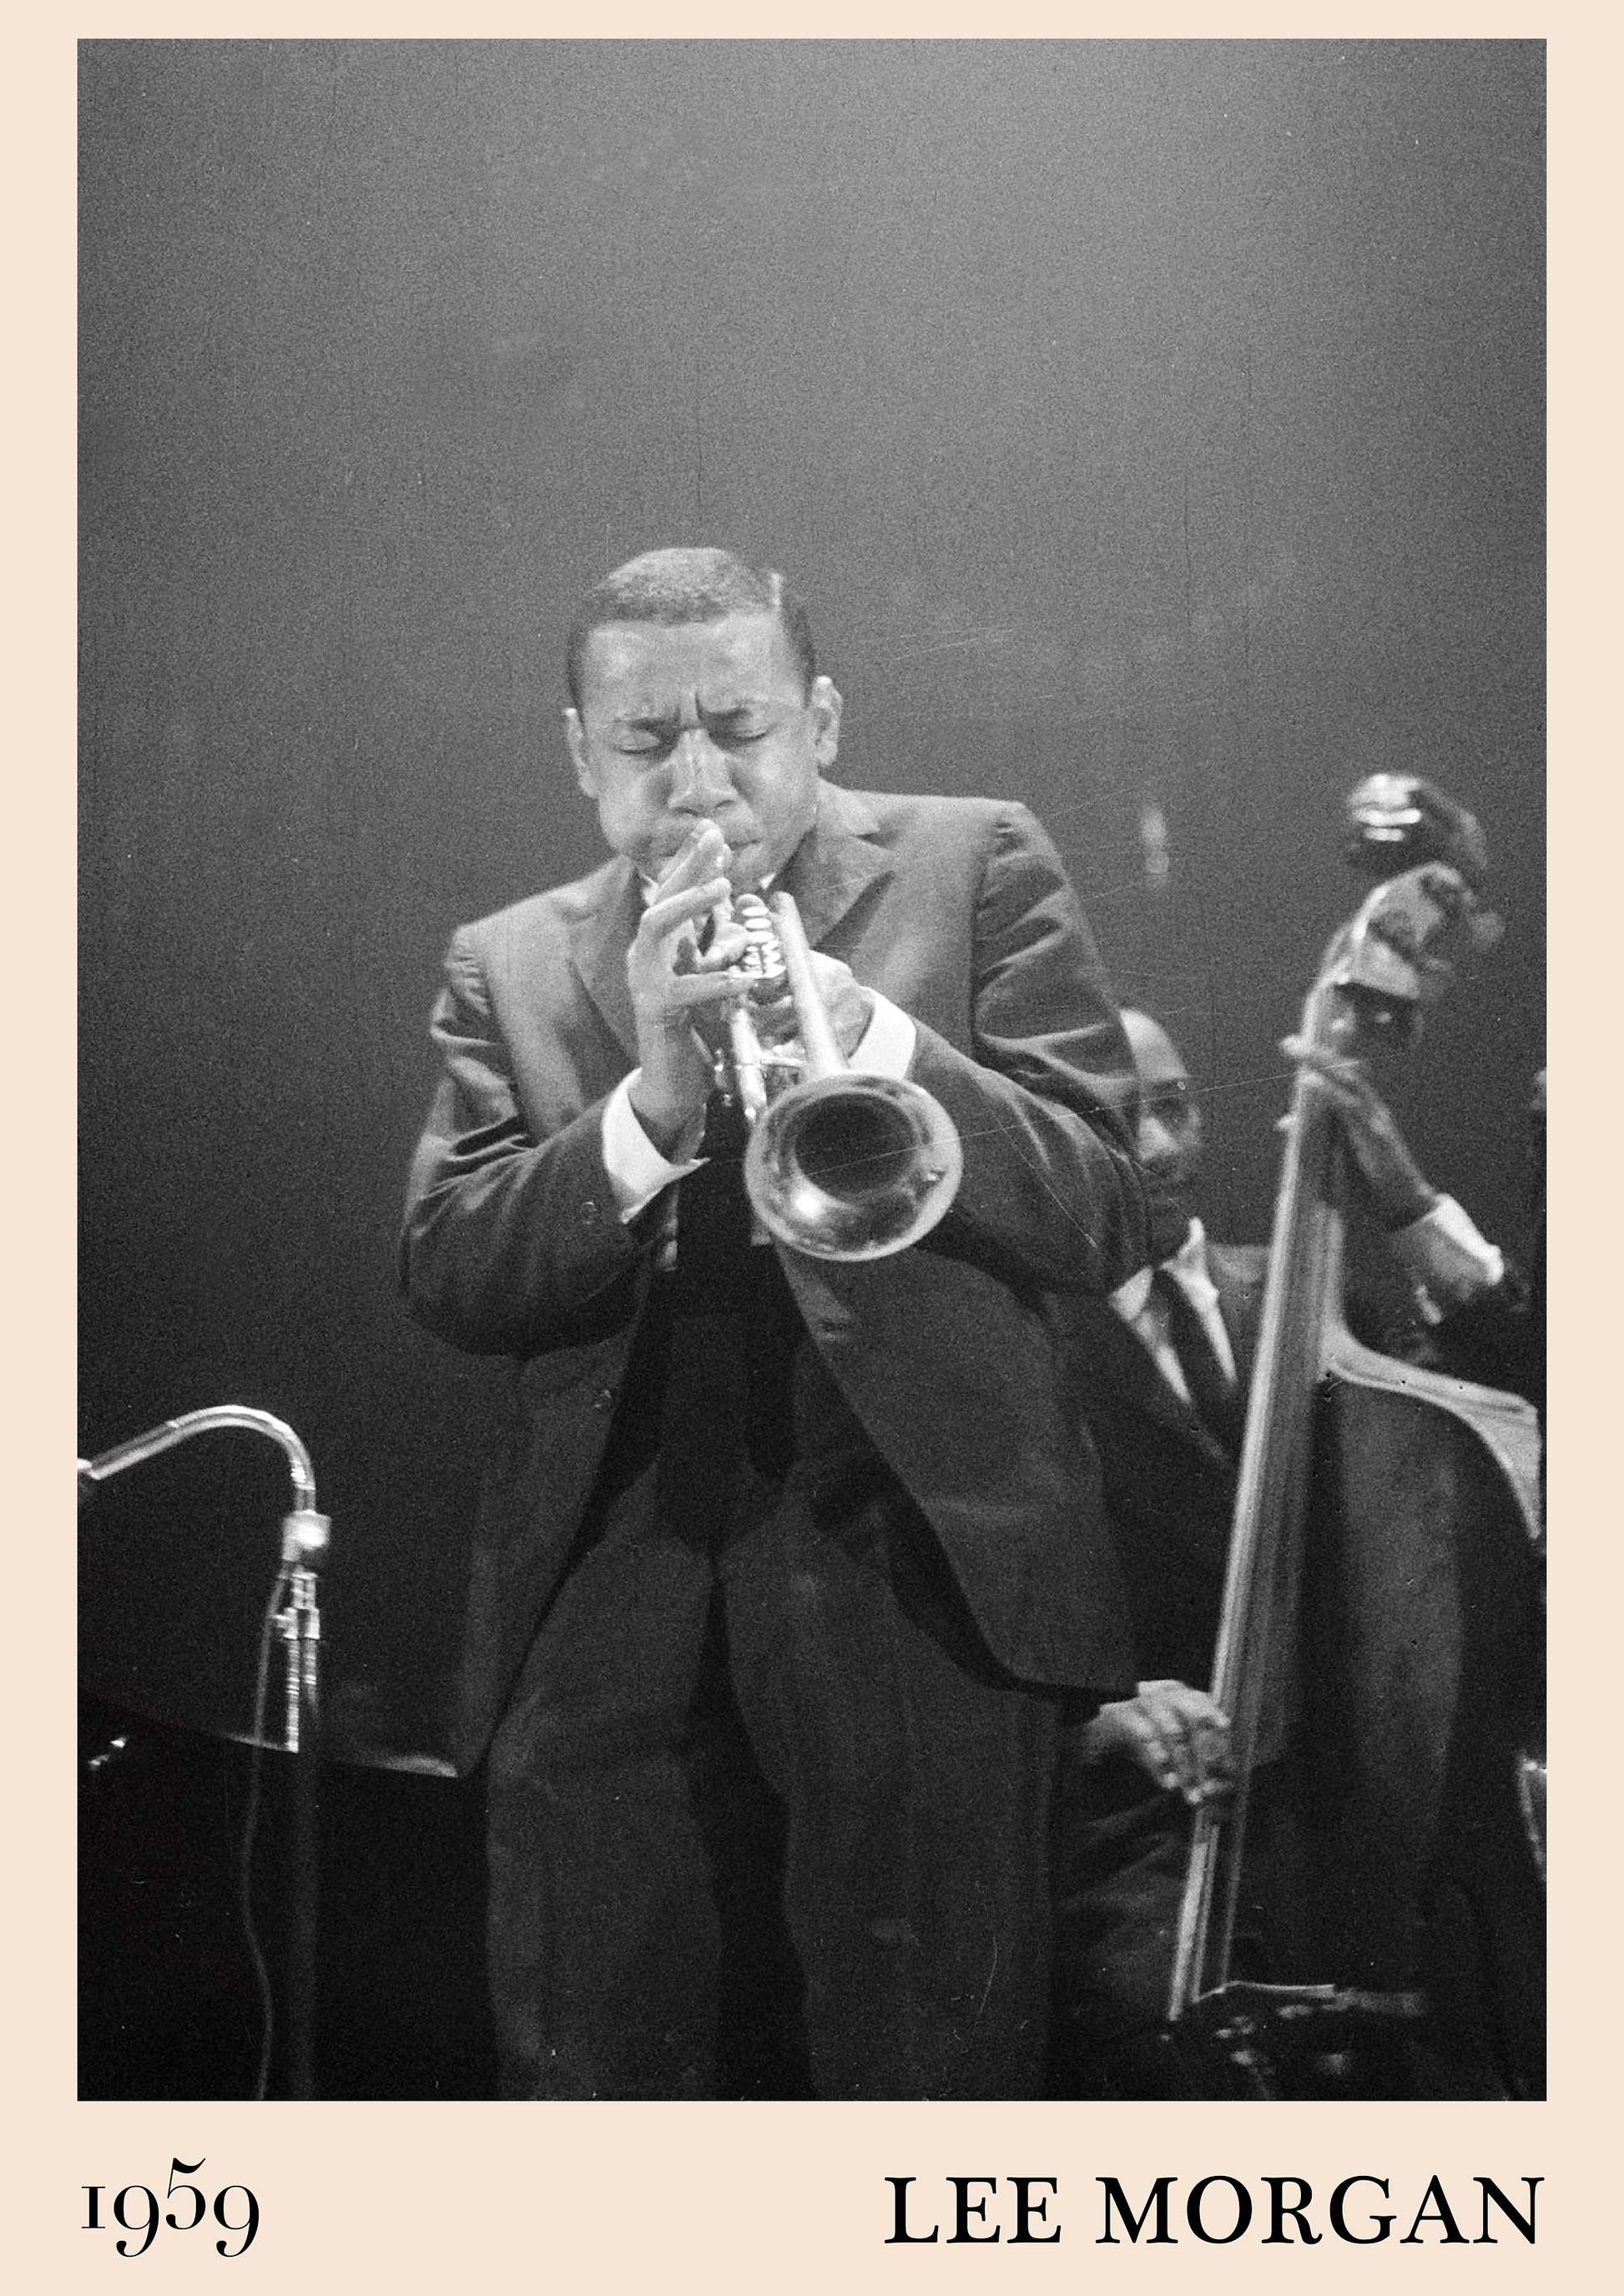 1959 photograph of Lee Morgan playing the Trumpet transformed into a stylish jazz poster on an off-white background